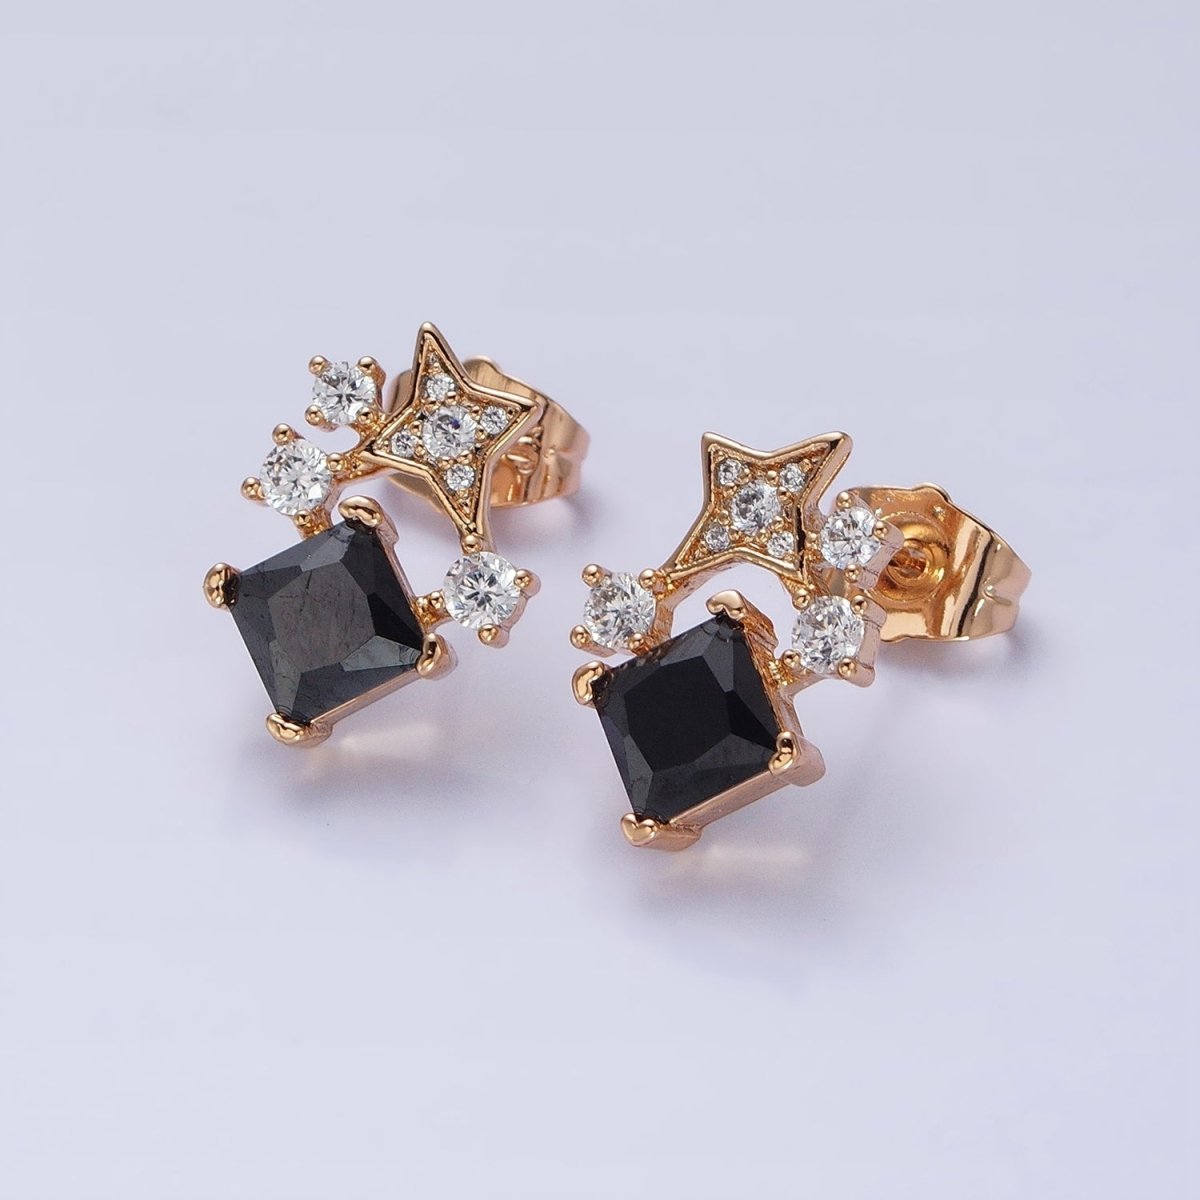 Black, Clear, Blue, Pink Rhombus CZ Stone with Star Stud Earring in 18k Gold Filled AB793 AB794 AB795 AB796 AB797 - DLUXCA